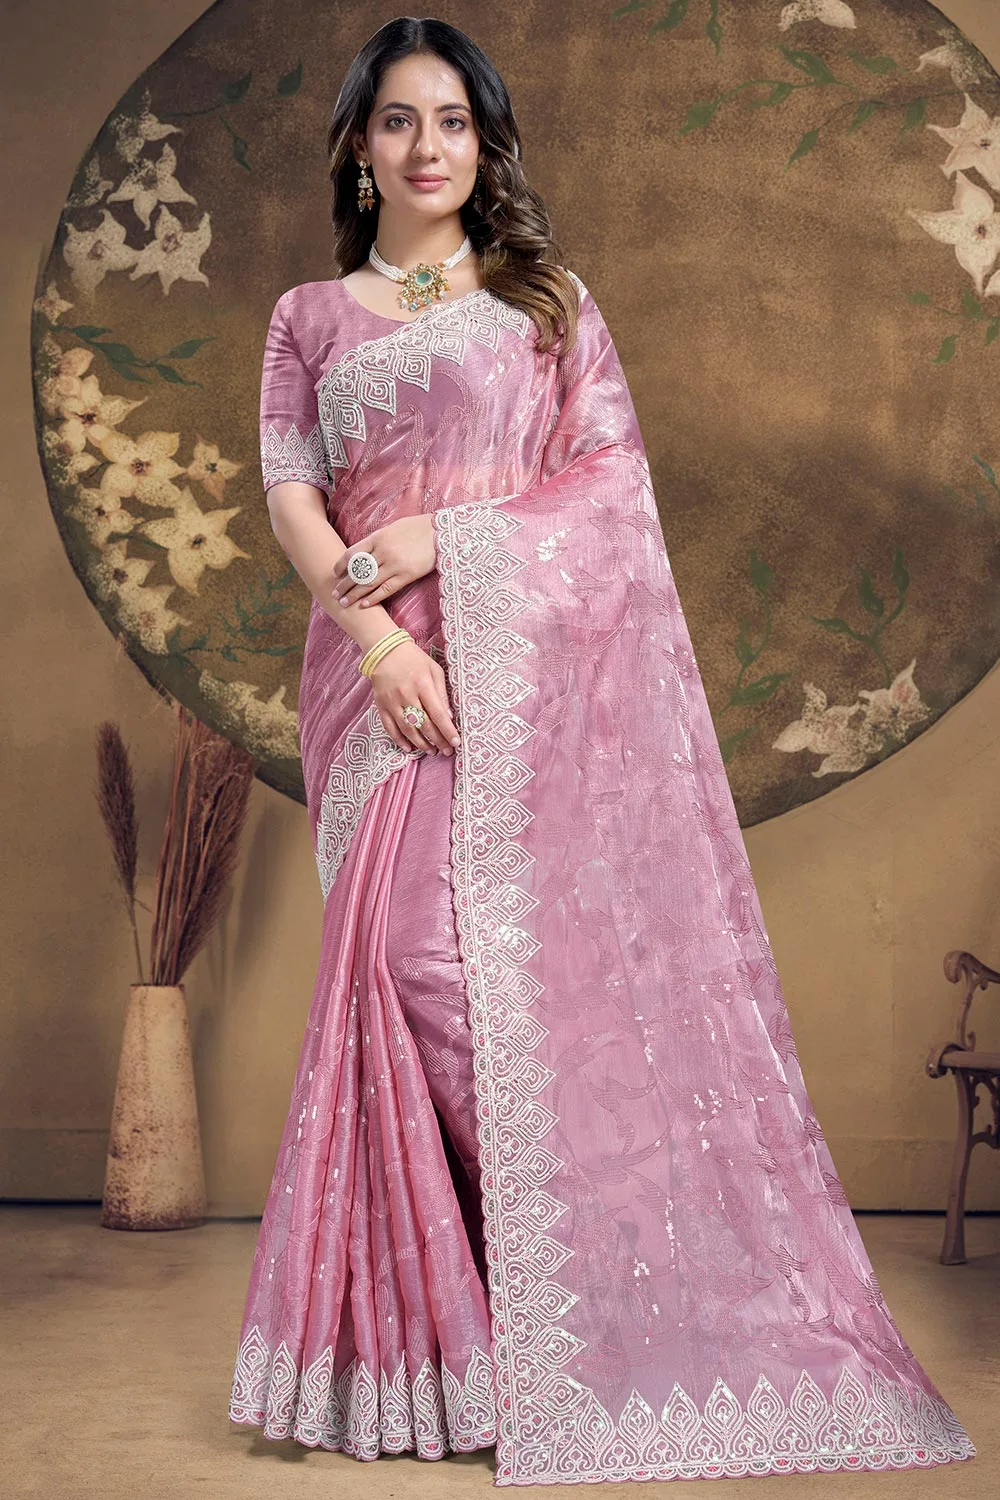 Pink Saree: Heavy Sequence Embroidered Work with Matching Blouse